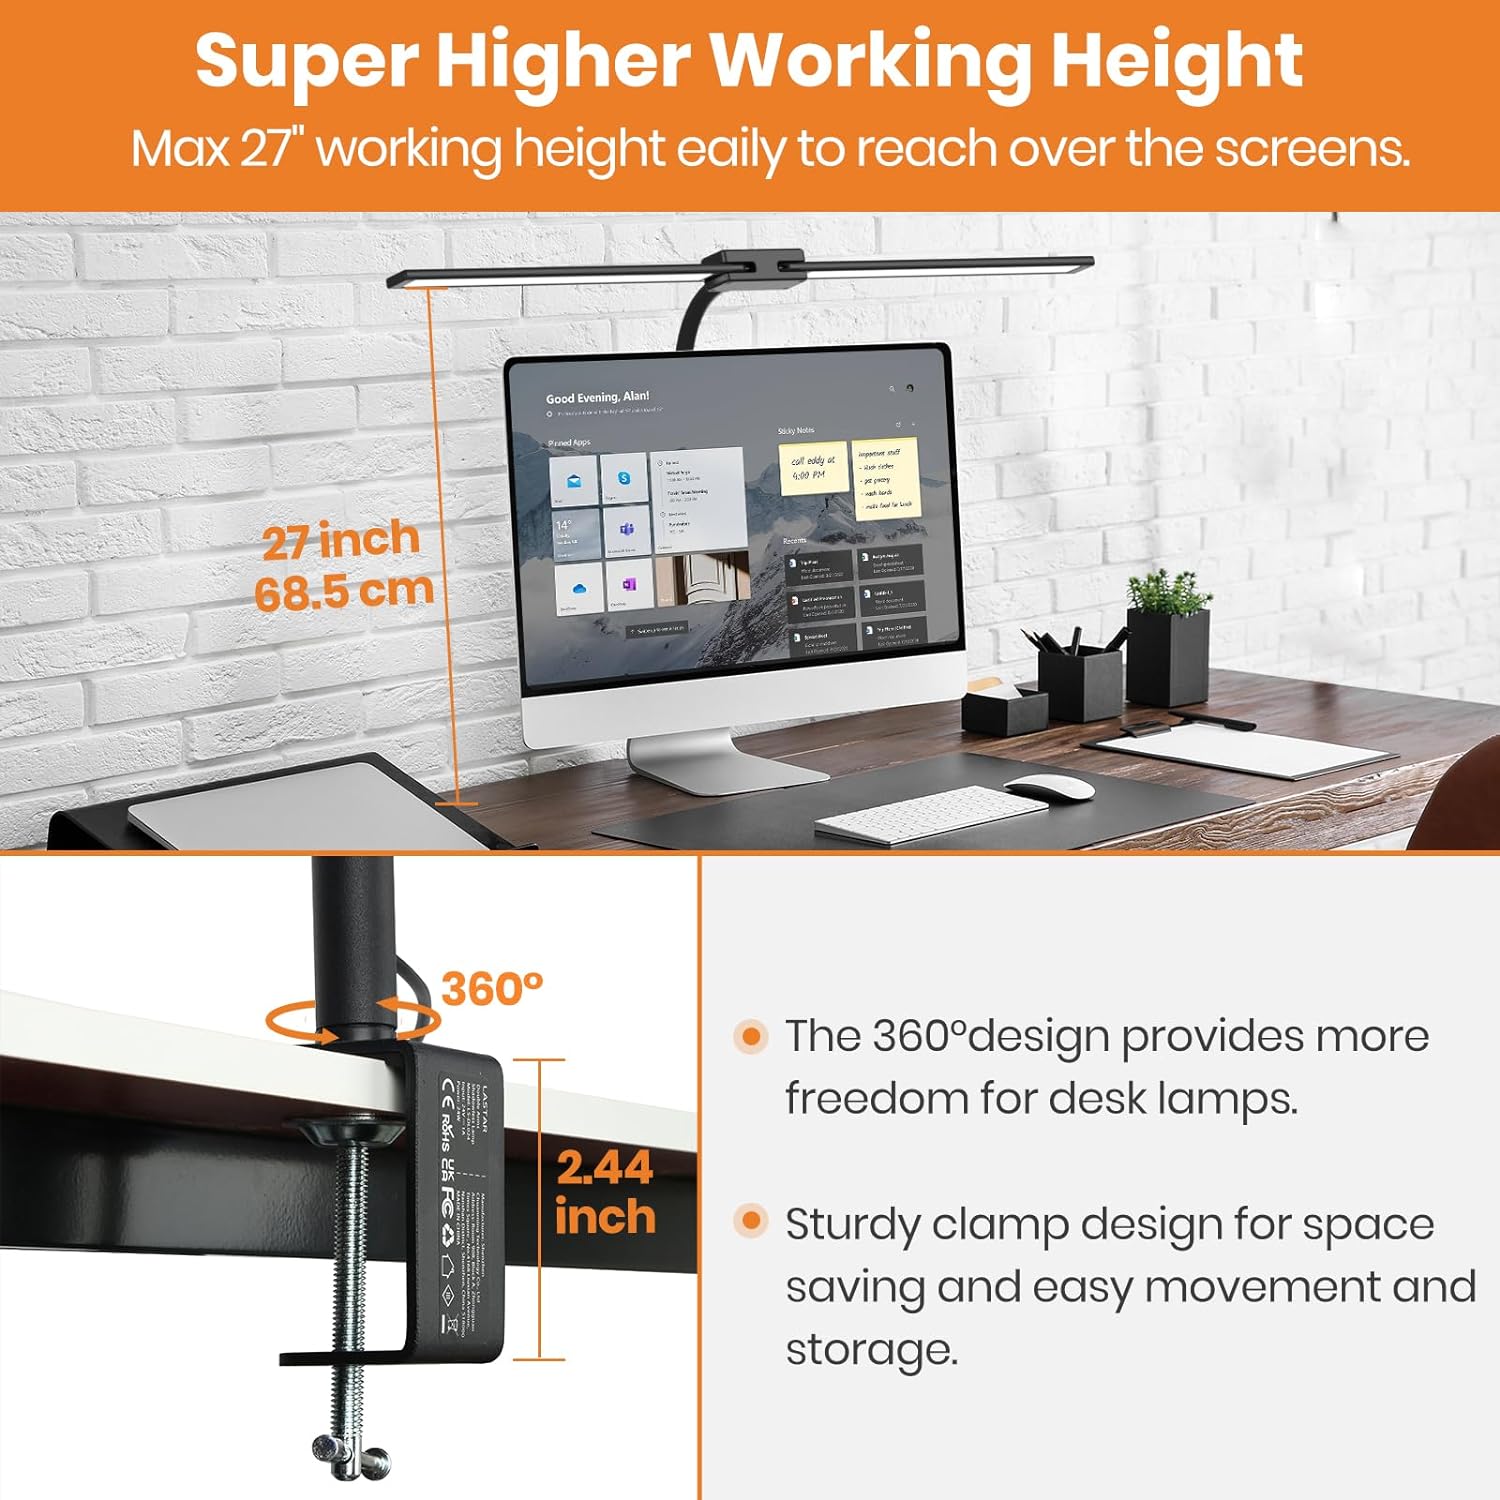 LASTAR LED Desk Lamp with Remote Control, 32.5" Large Architect Desk Lamp with Clamp, Timer, 24W Ultra Bright Gooseneck Desk lamp for Home Office Computer Reading